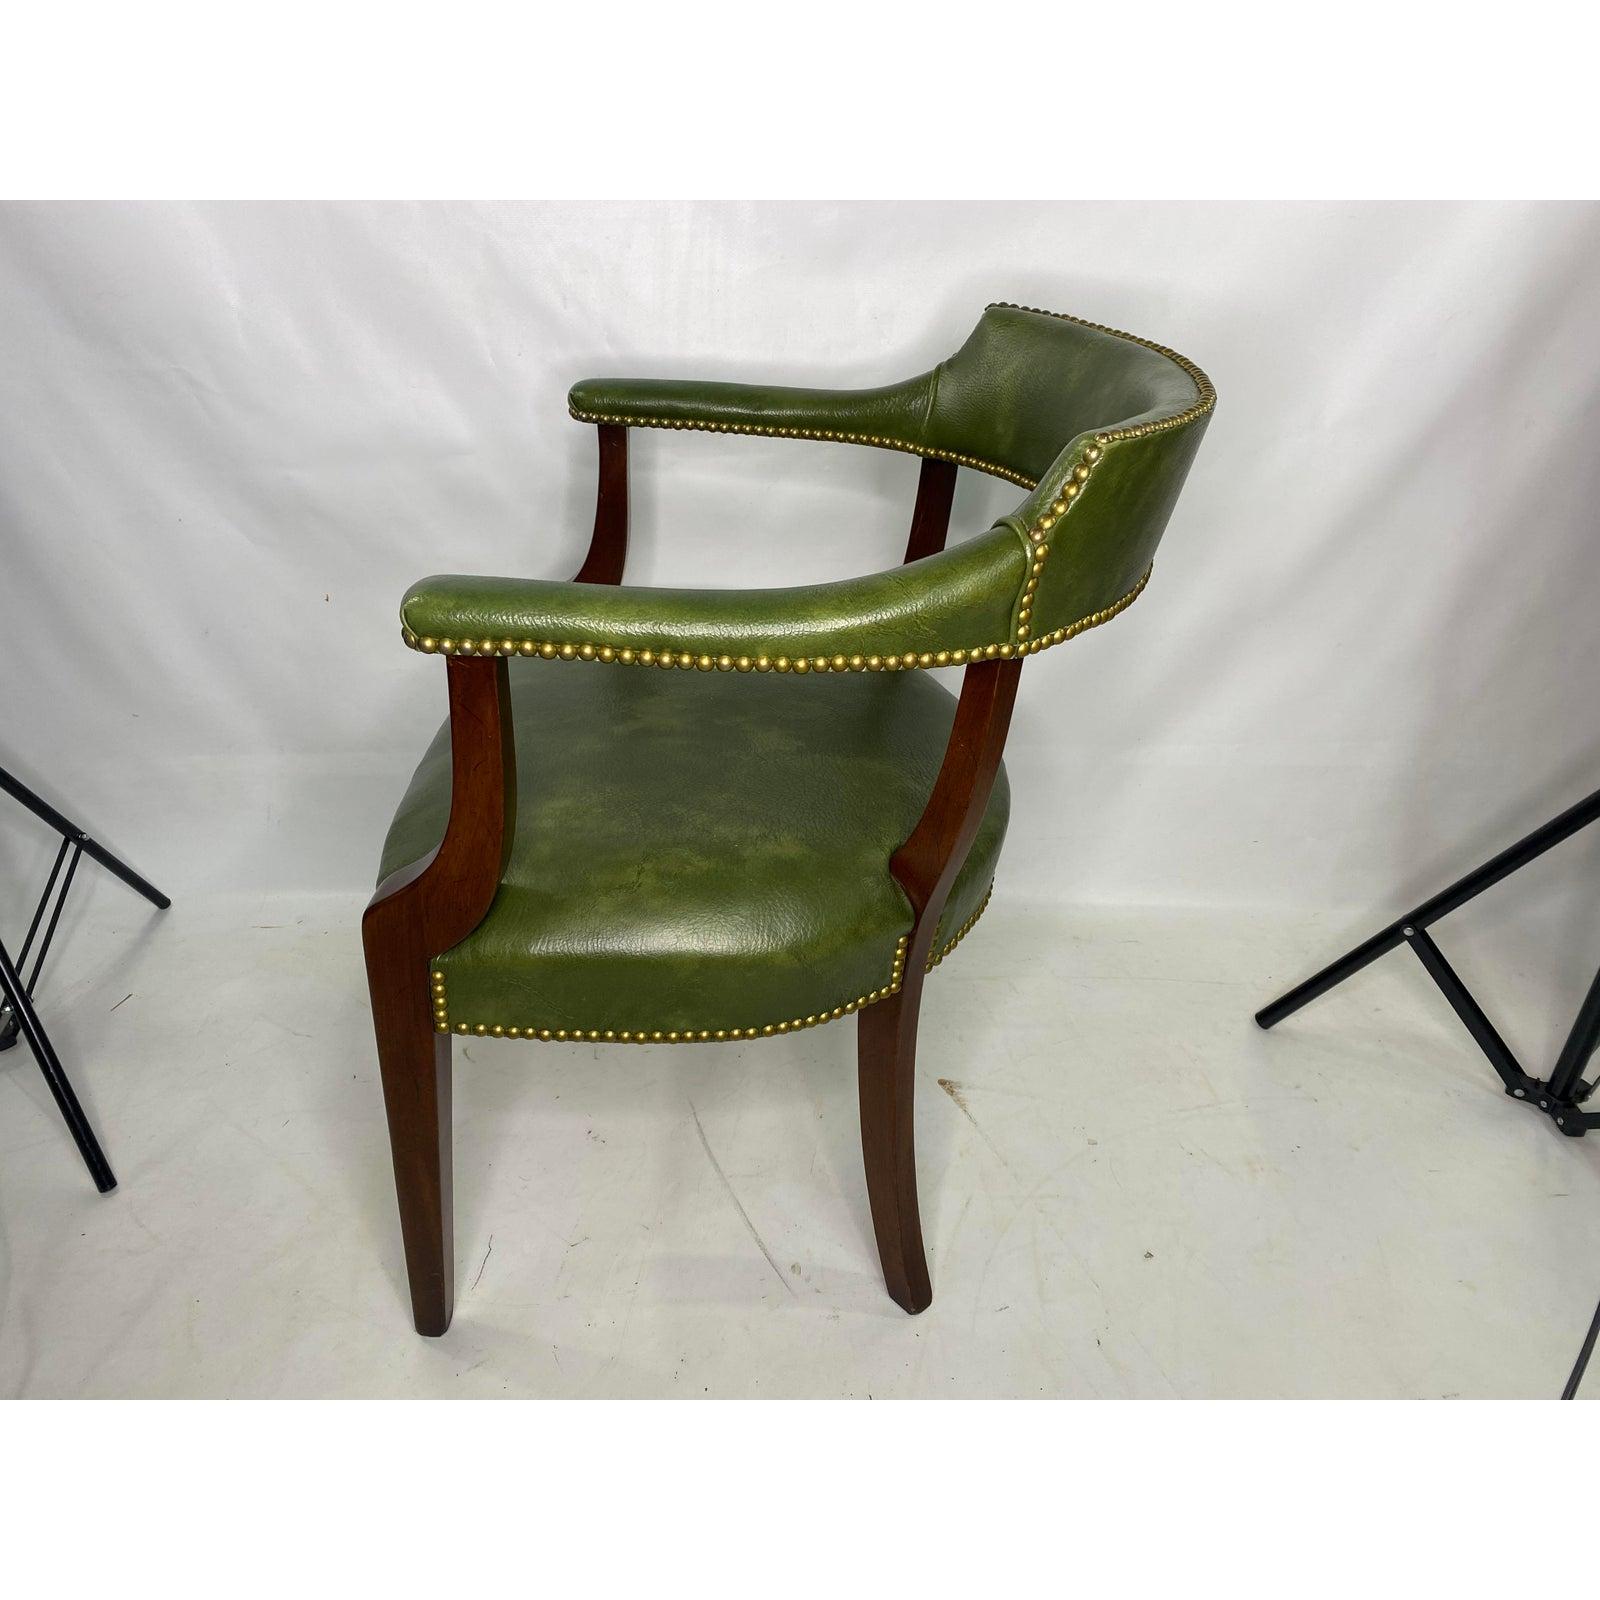 Vintage green leather chair made by Hickory Chair Company. Chair is very well made. Also I have 8 available in total.